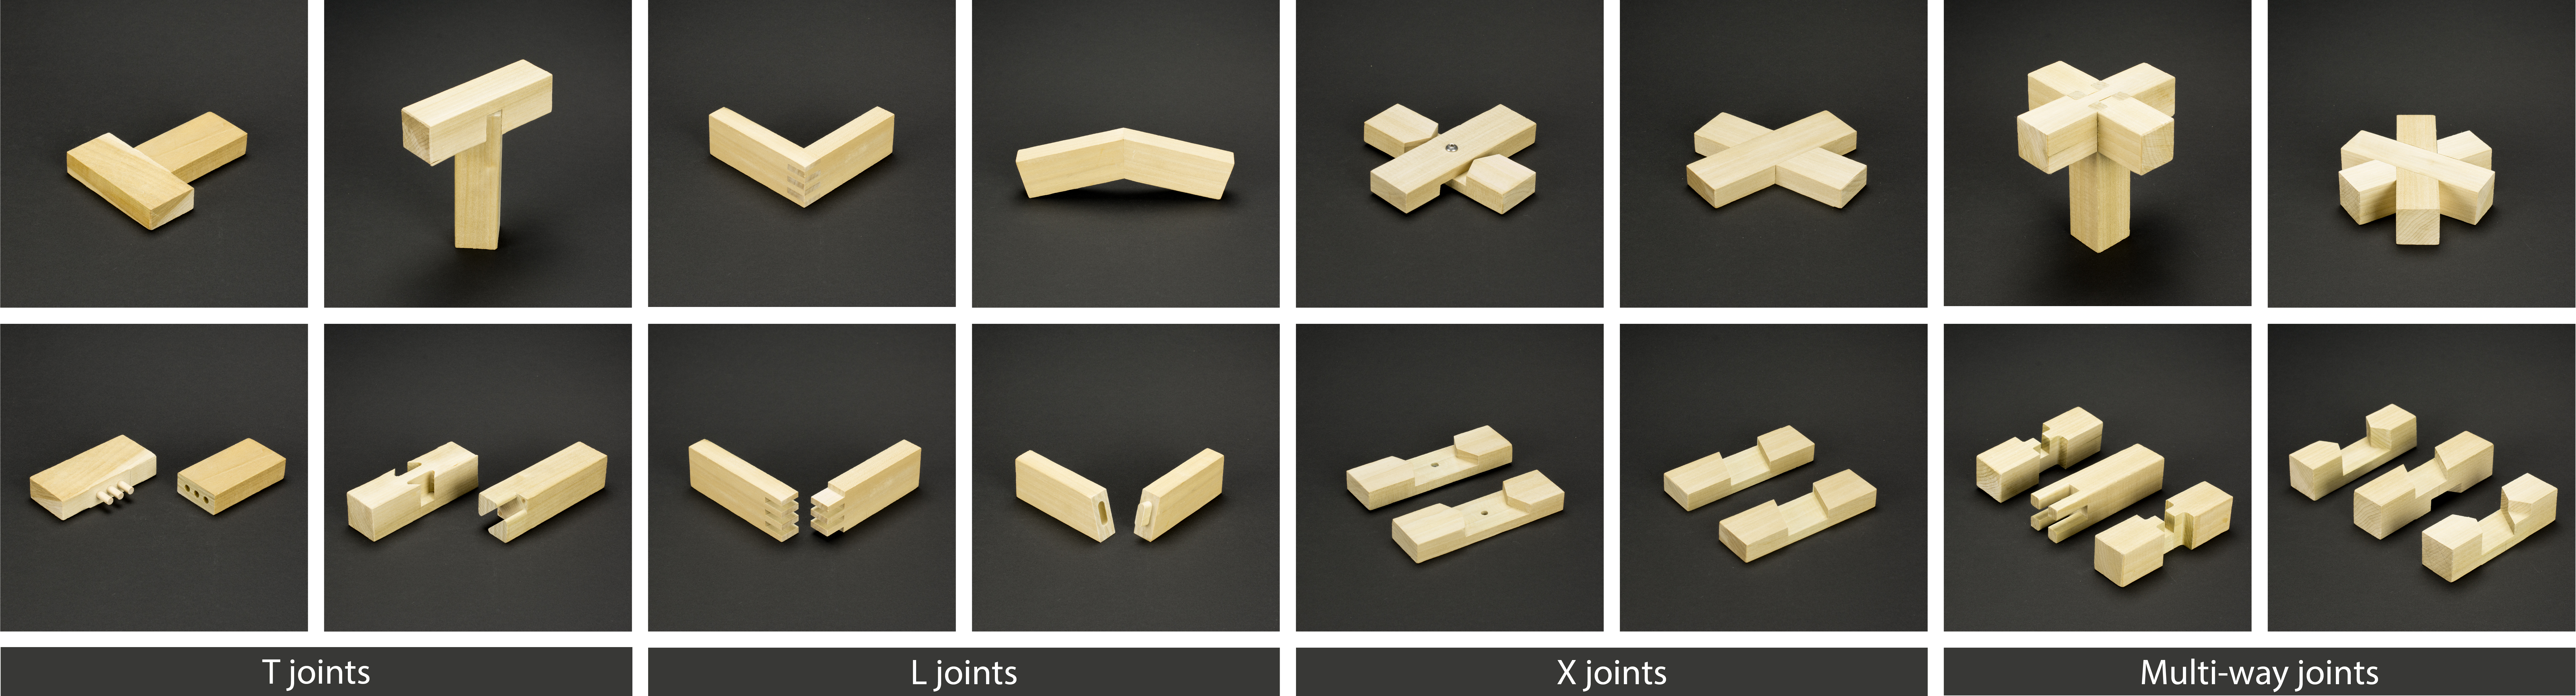 example joints